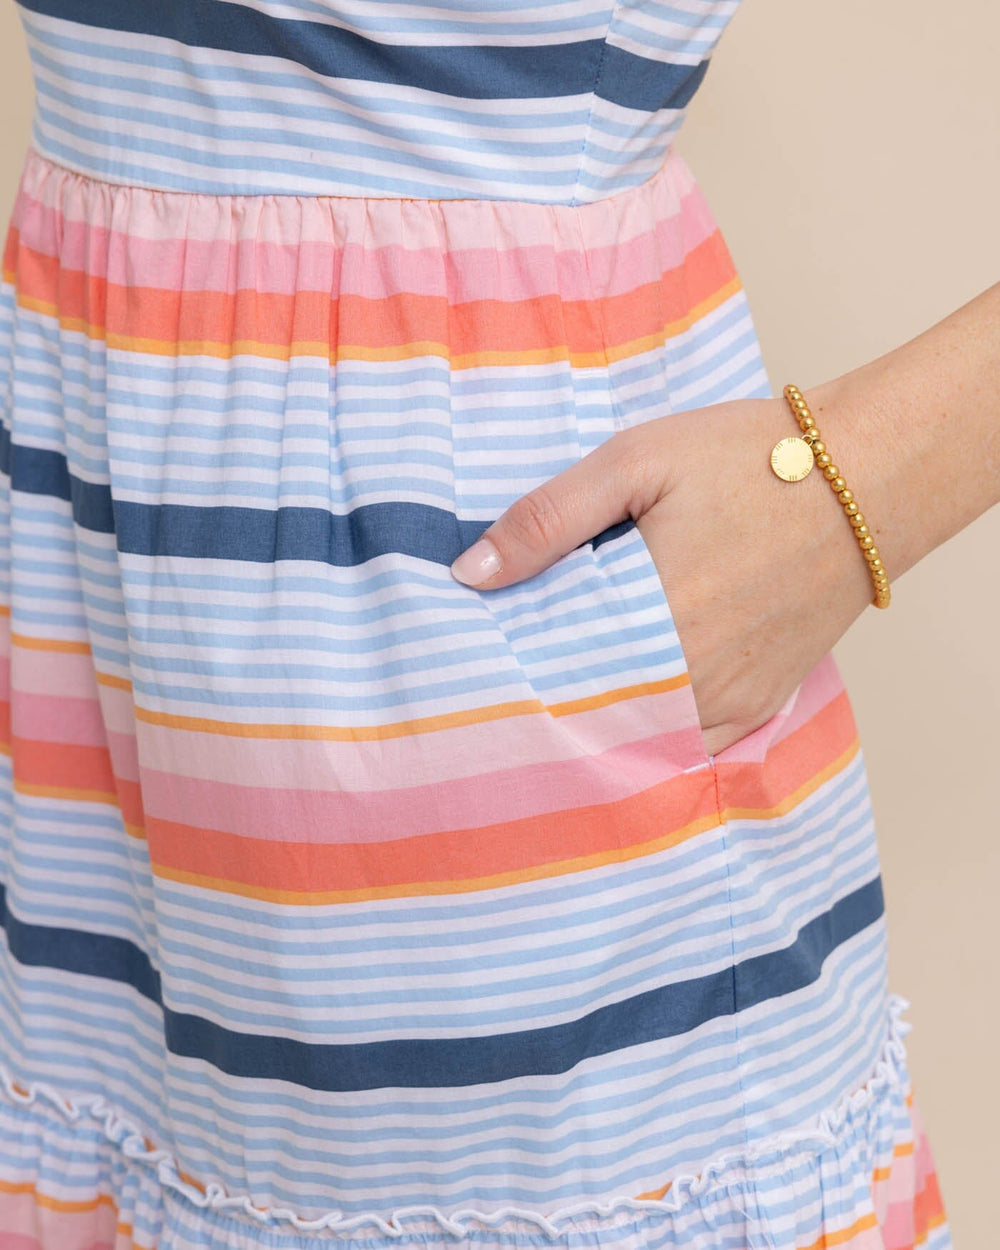 The detail view of the Southern Tide Linsey Set Sail Stripe Dress by Southern Tide - Conch Shell